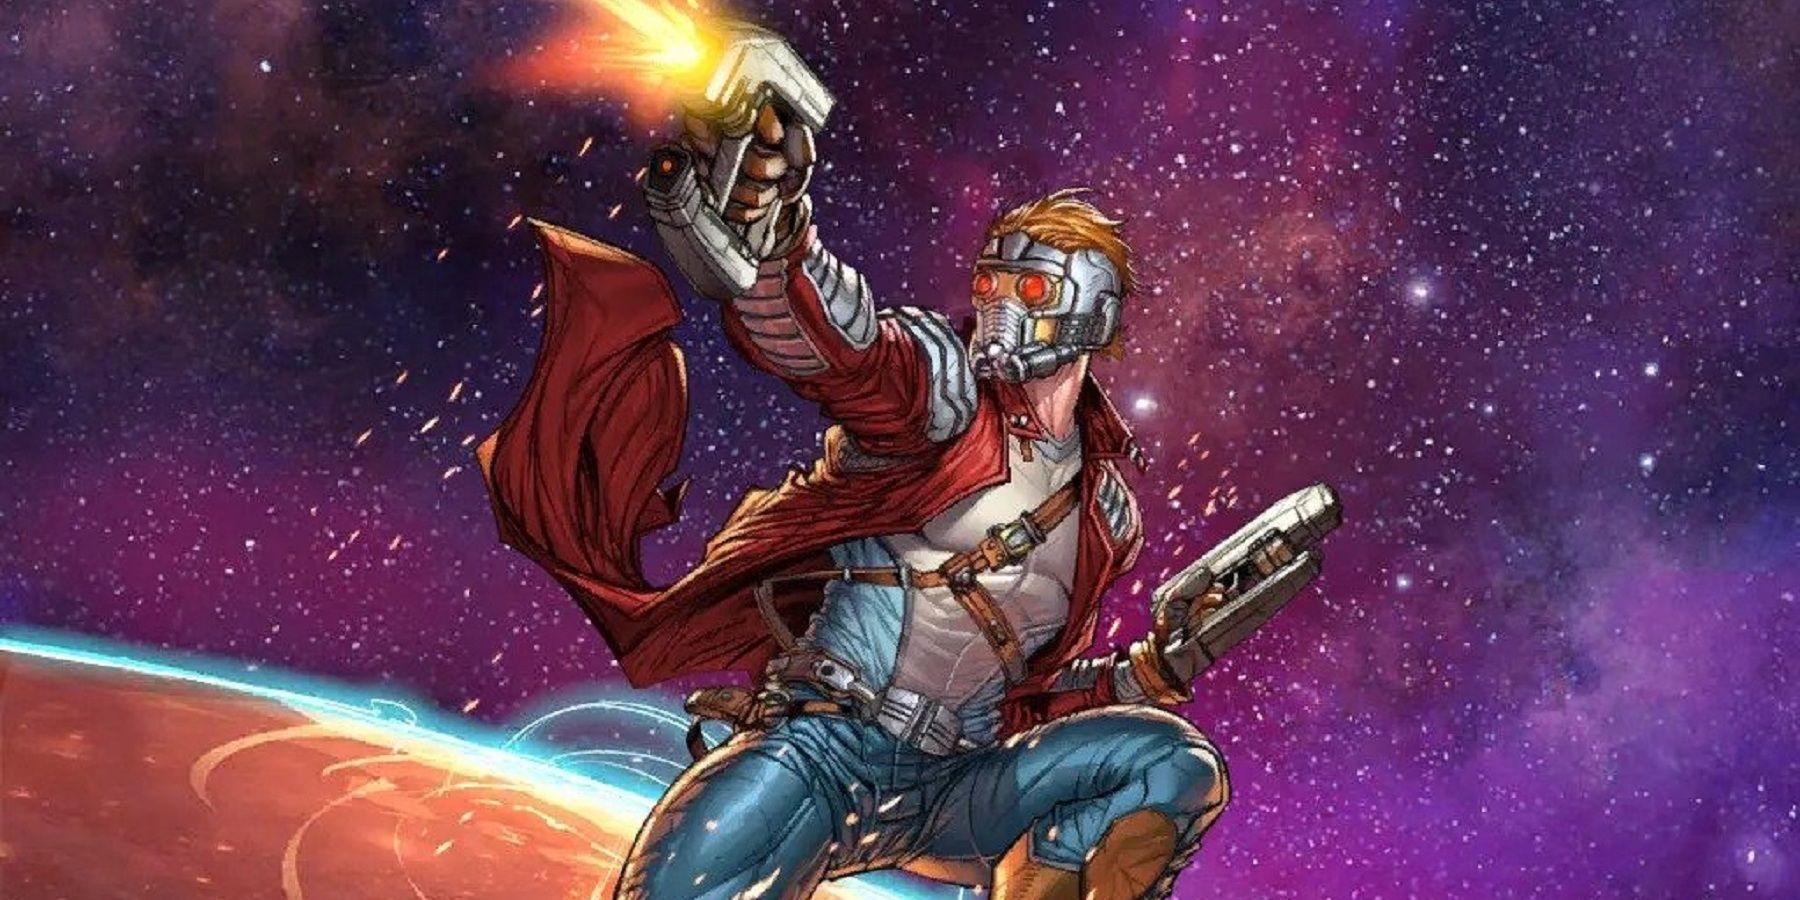 Star Lord - Marvel Snap Cards - Out of Games